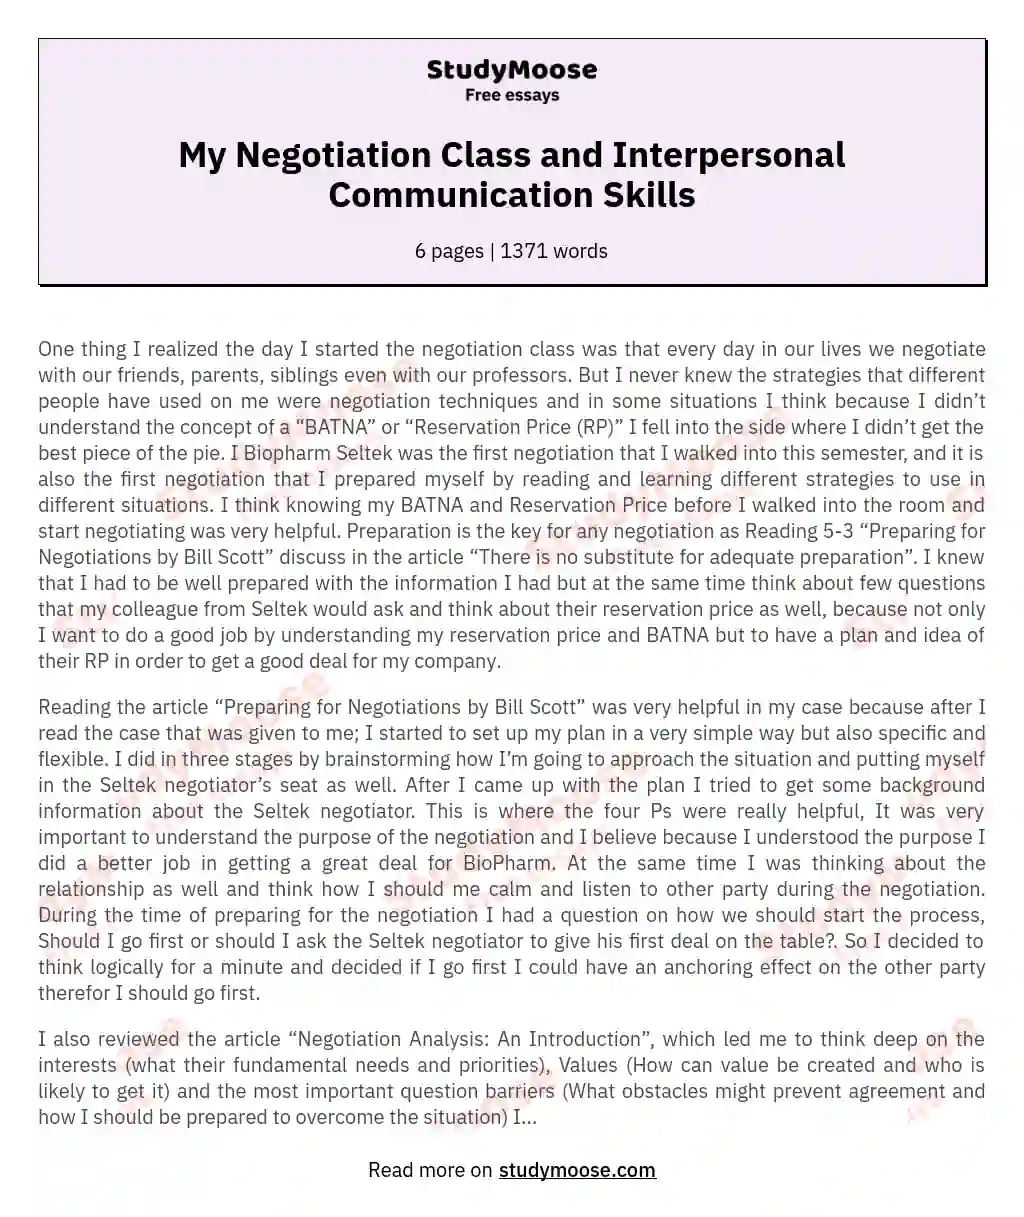 My Negotiation Class and Interpersonal Communication Skills essay